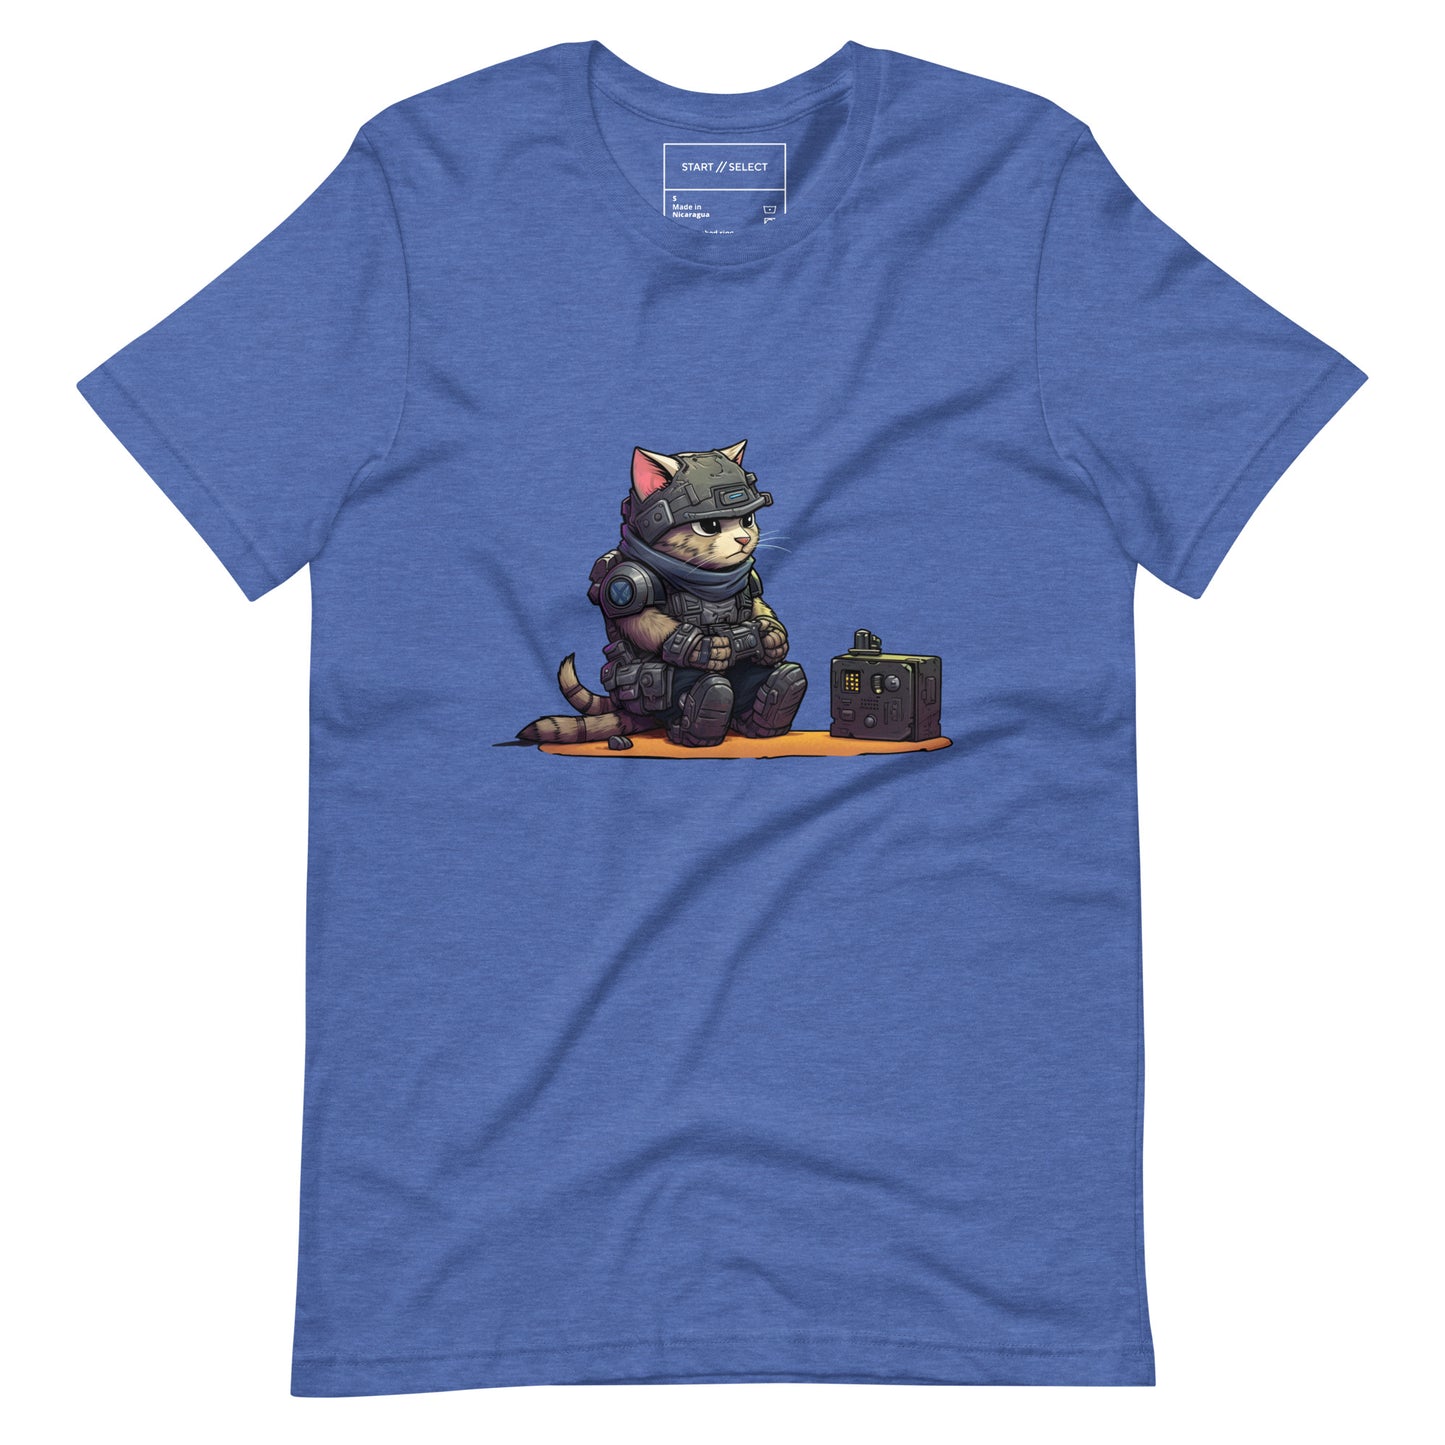 Gears of Fur Tee – Console Cats